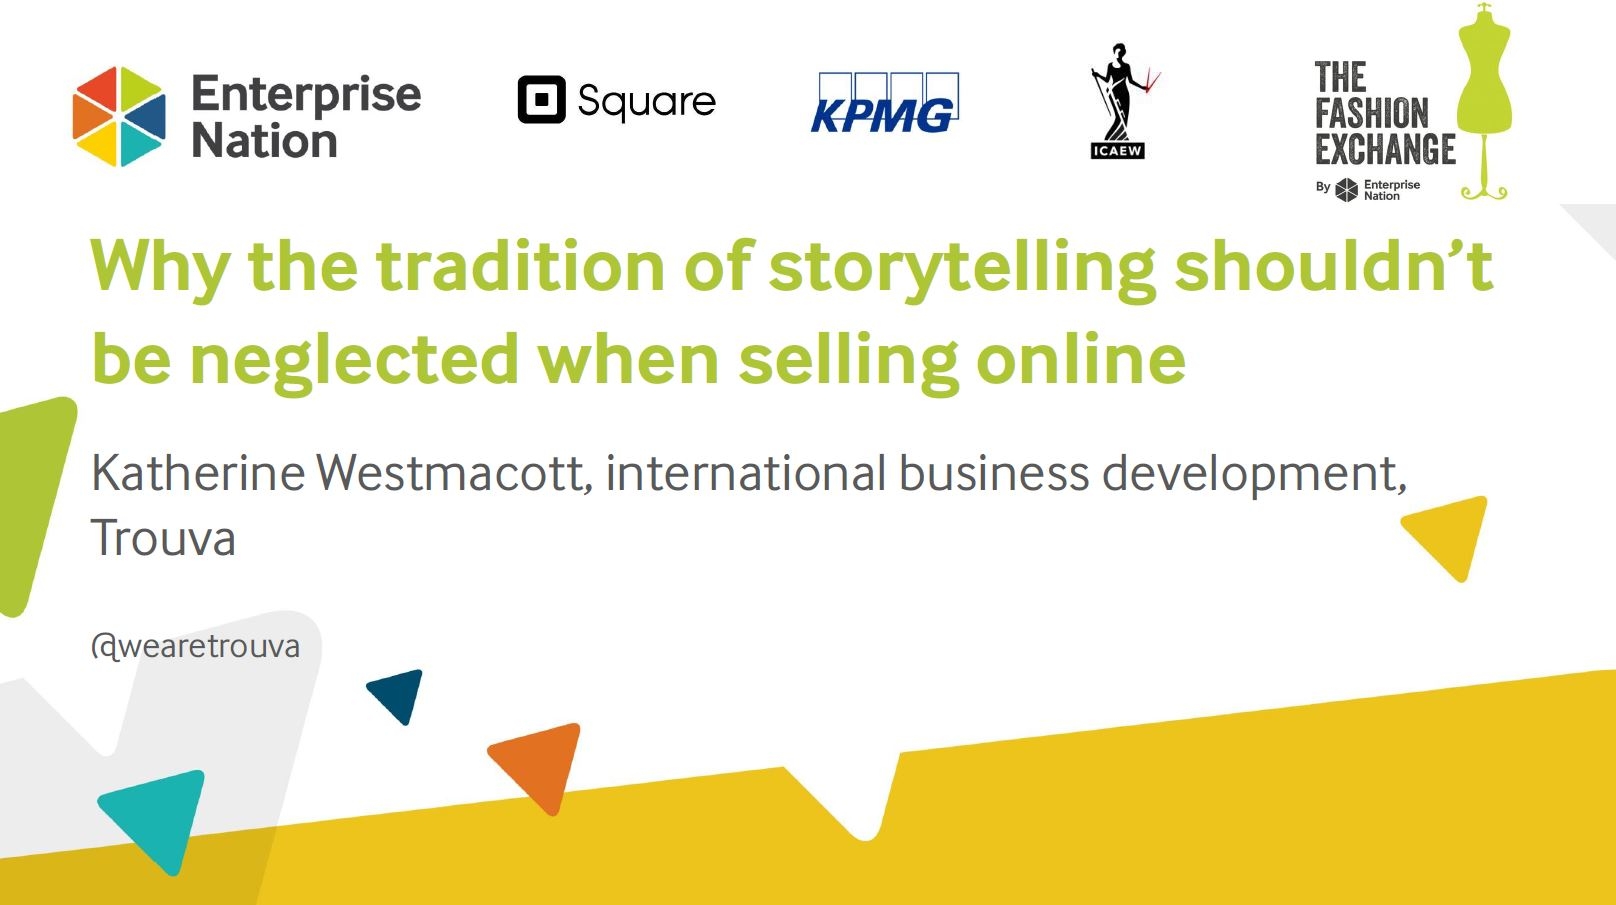 Why the tradition of storytelling shouldn't be neglected when selling online